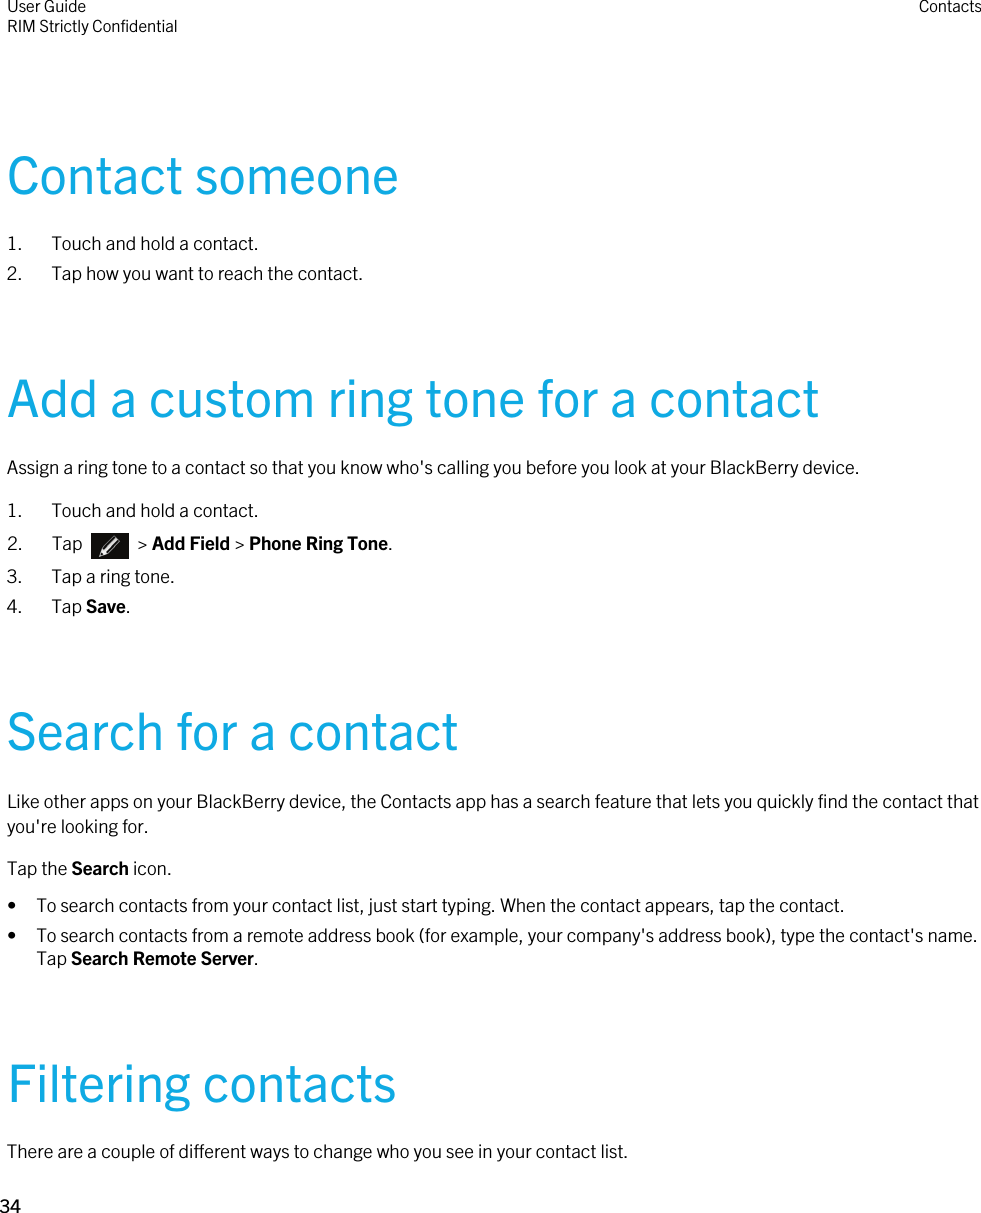 Contact someone1. Touch and hold a contact.2. Tap how you want to reach the contact.Add a custom ring tone for a contactAssign a ring tone to a contact so that you know who&apos;s calling you before you look at your BlackBerry device.1. Touch and hold a contact.2.  Tap    &gt; Add Field &gt; Phone Ring Tone.3. Tap a ring tone.4. Tap Save.Search for a contactLike other apps on your BlackBerry device, the Contacts app has a search feature that lets you quickly find the contact that you&apos;re looking for.Tap the Search icon.• To search contacts from your contact list, just start typing. When the contact appears, tap the contact.• To search contacts from a remote address book (for example, your company&apos;s address book), type the contact&apos;s name. Tap Search Remote Server.Filtering contactsThere are a couple of different ways to change who you see in your contact list.User GuideRIM Strictly ConfidentialContacts34 